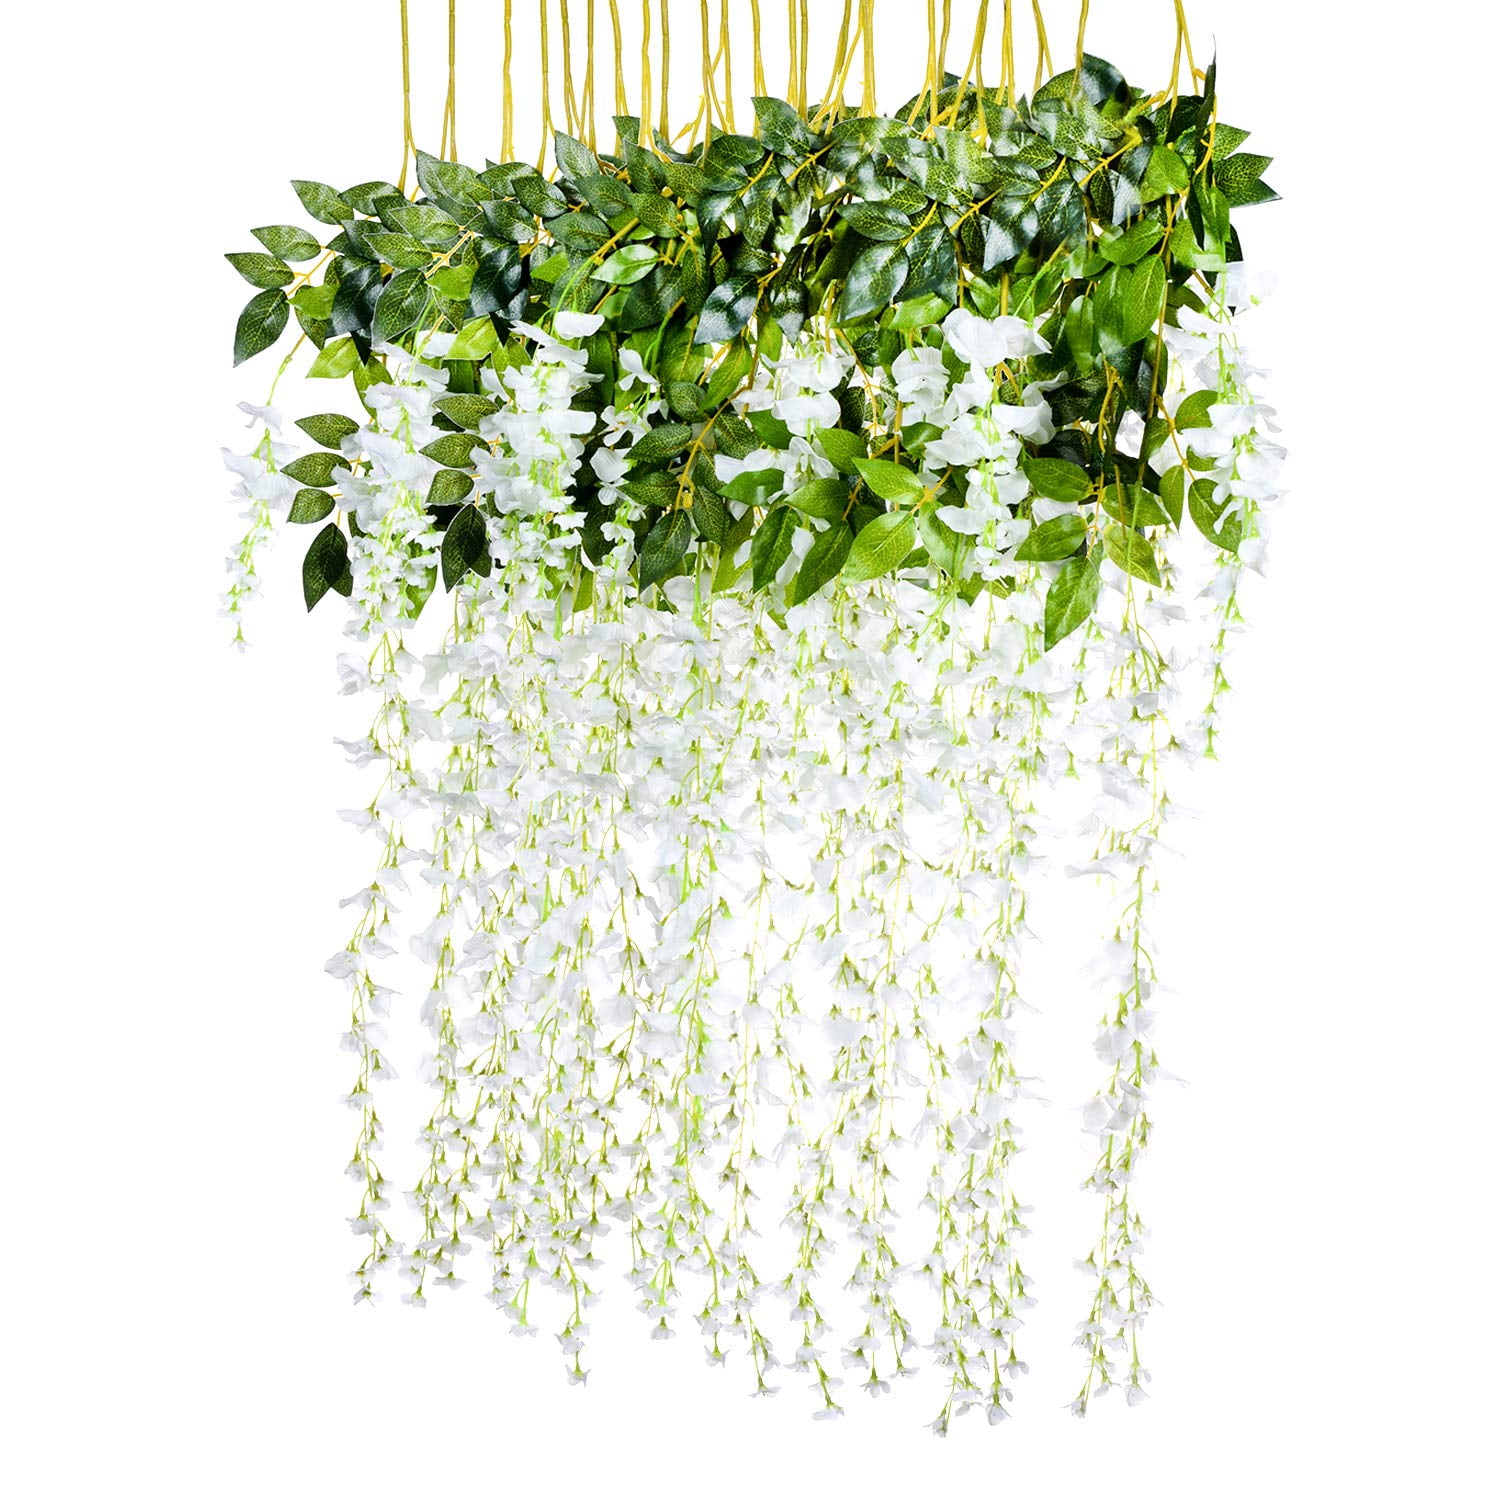 White YQing 12PCS//Lot 3.6feet//piece Artificial Flowers Fake Wisteria Vine Silk Flower for Wedding Decorations Home Garden Party Decor Simulation Flower